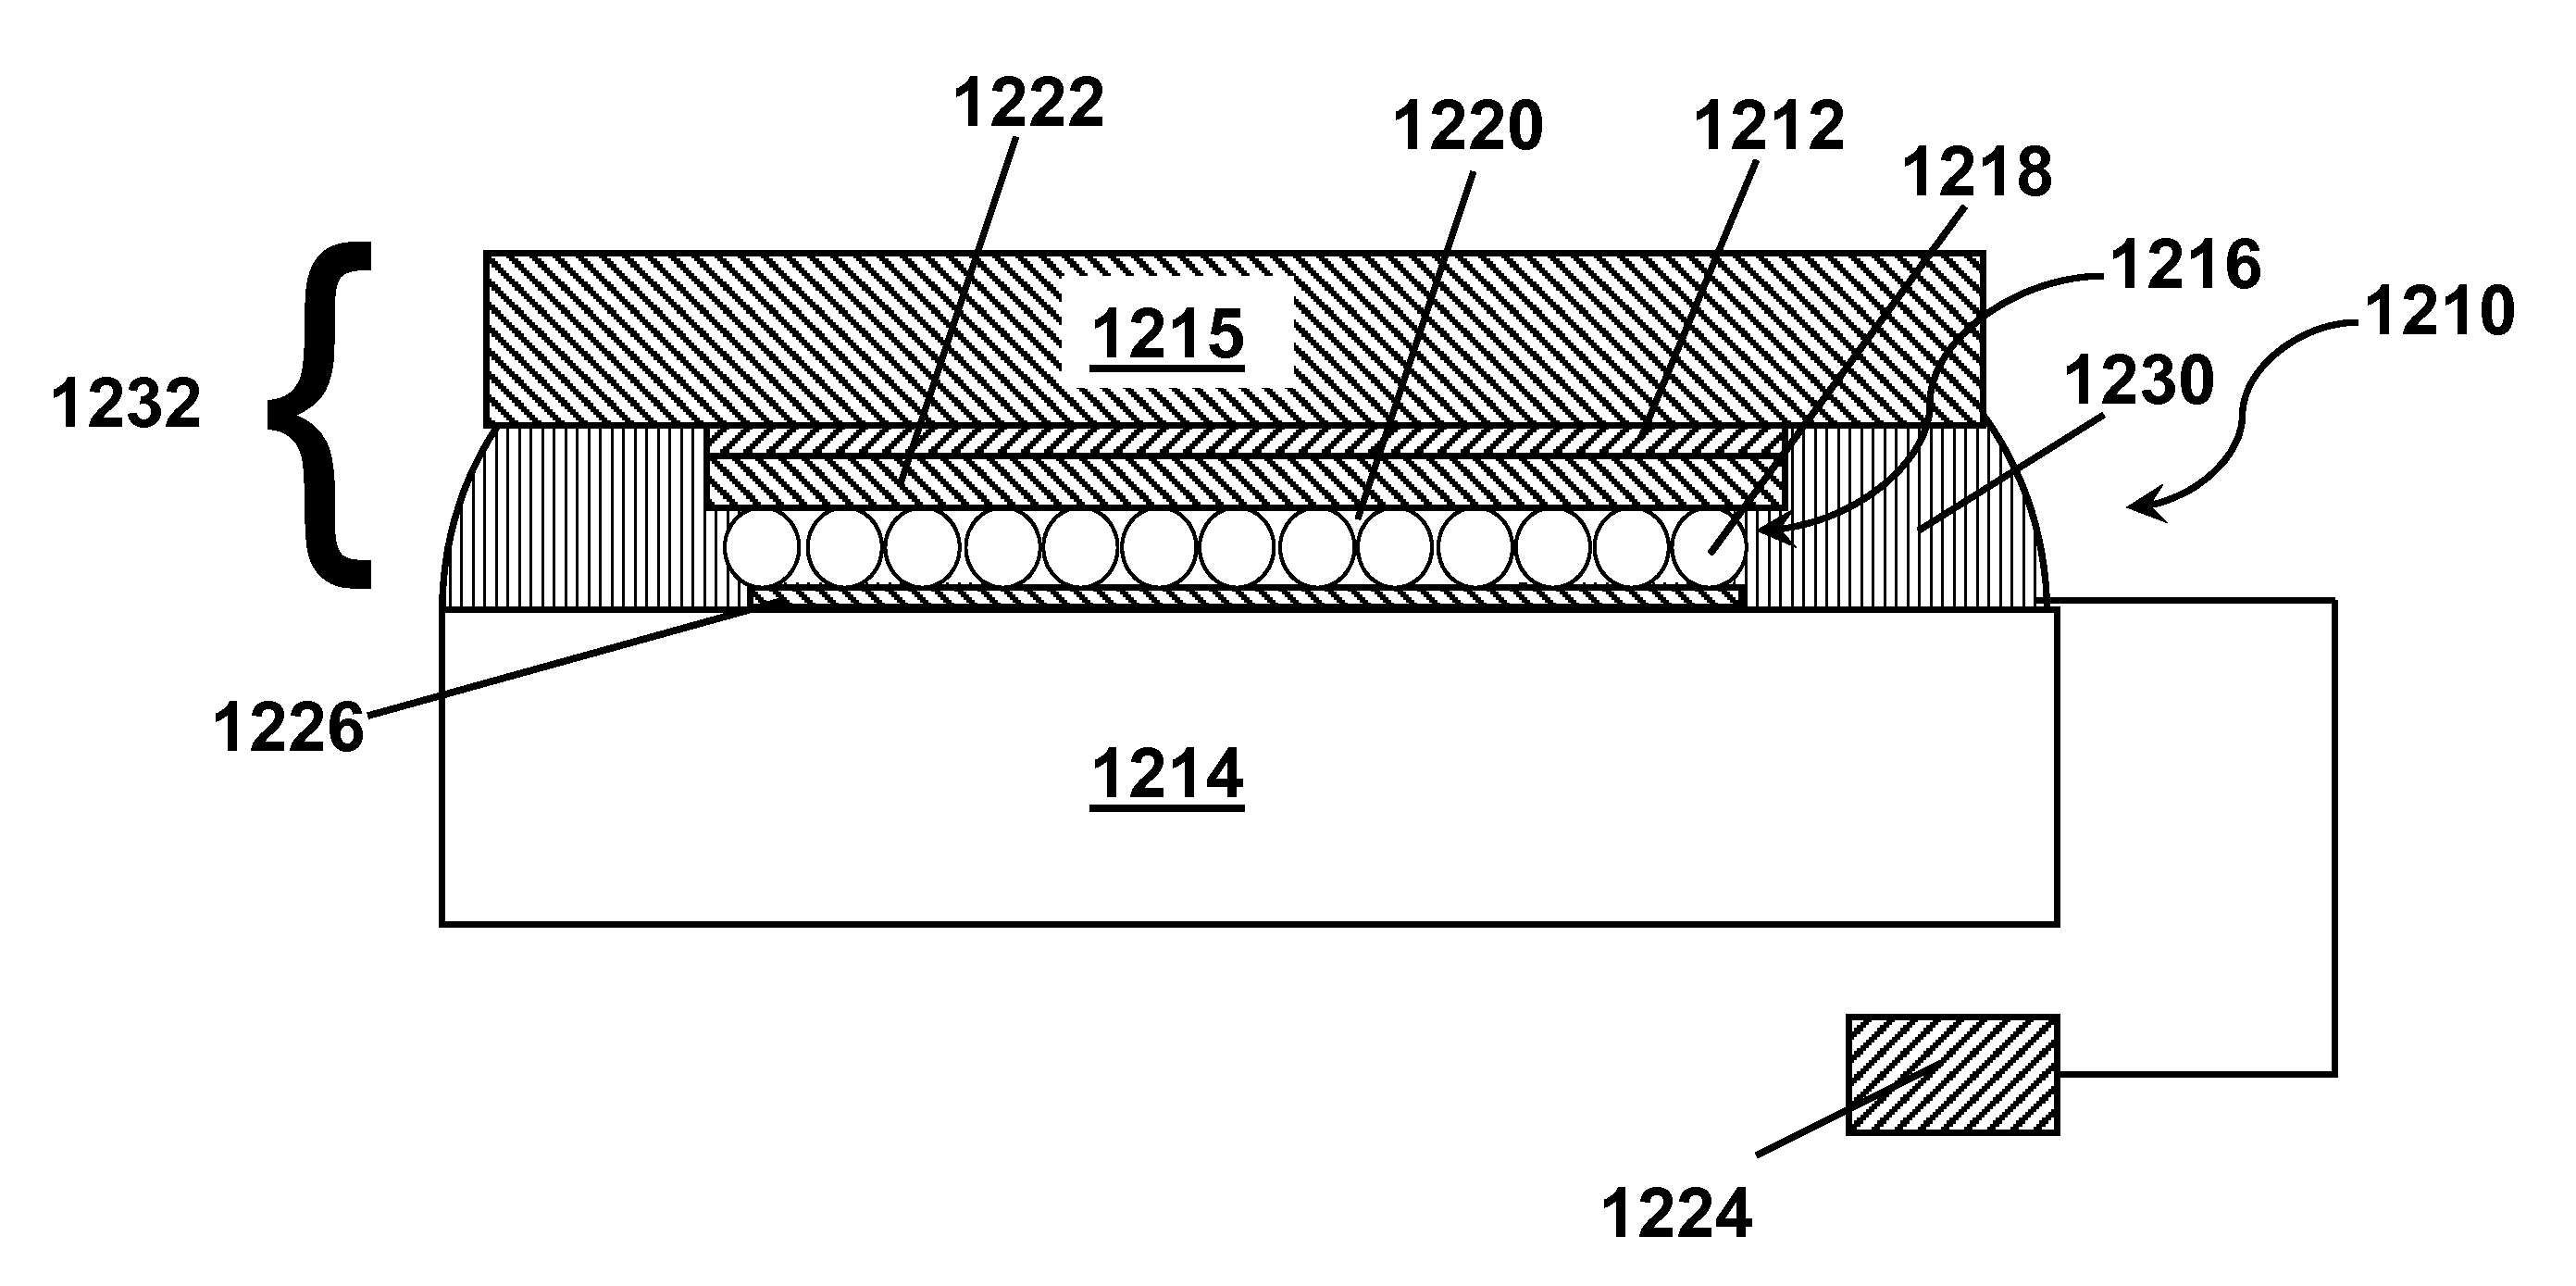 Electro-optic displays, and processes for the production thereof